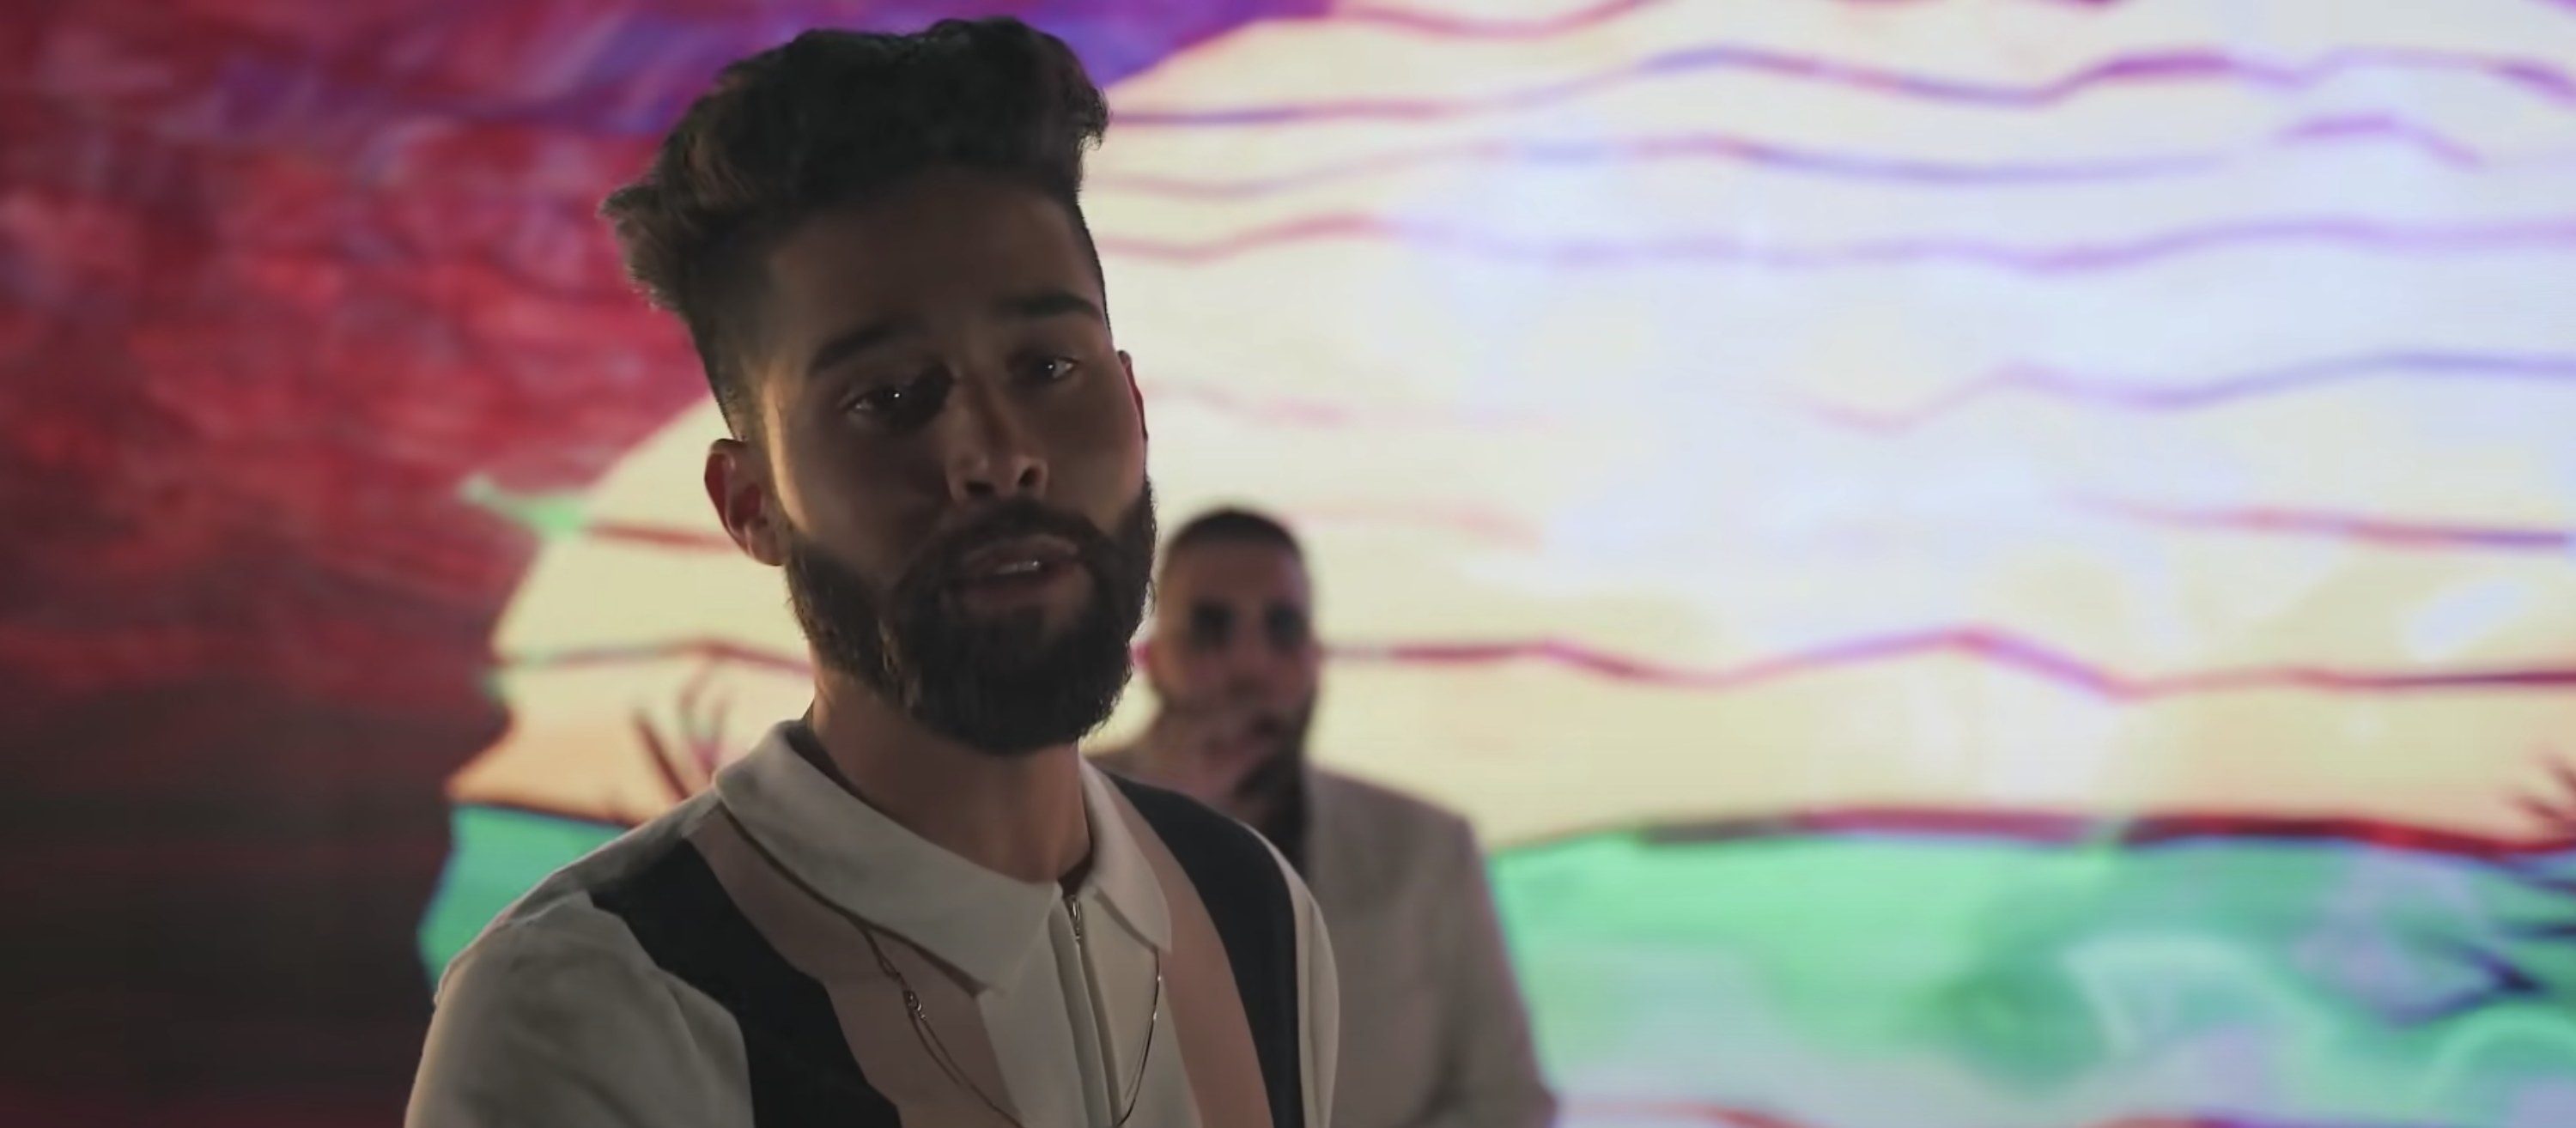 AP Dhillon sings in his music video for &quot;Excuses.&quot;